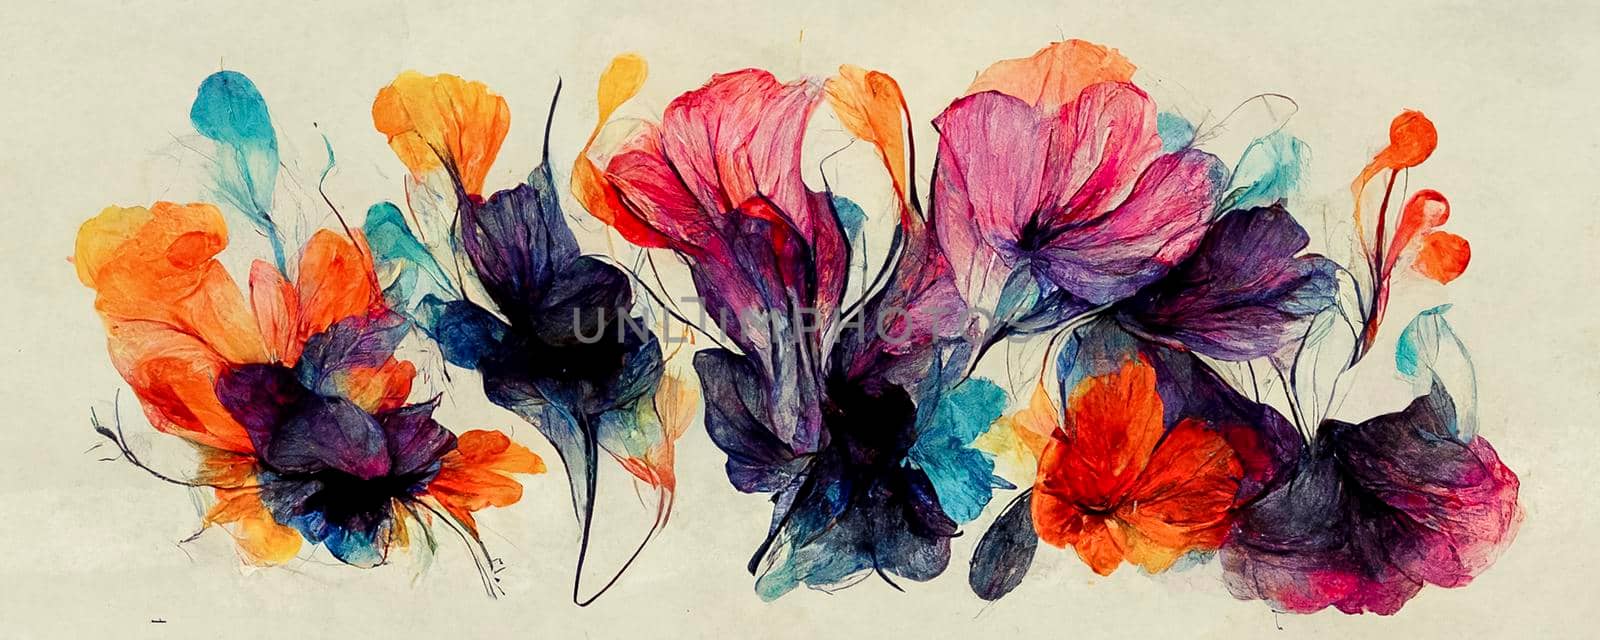 Luxury art in abstract flower style. Artistic design. The painter uses vibrant paints to create this magical floral art. by jbruiz78